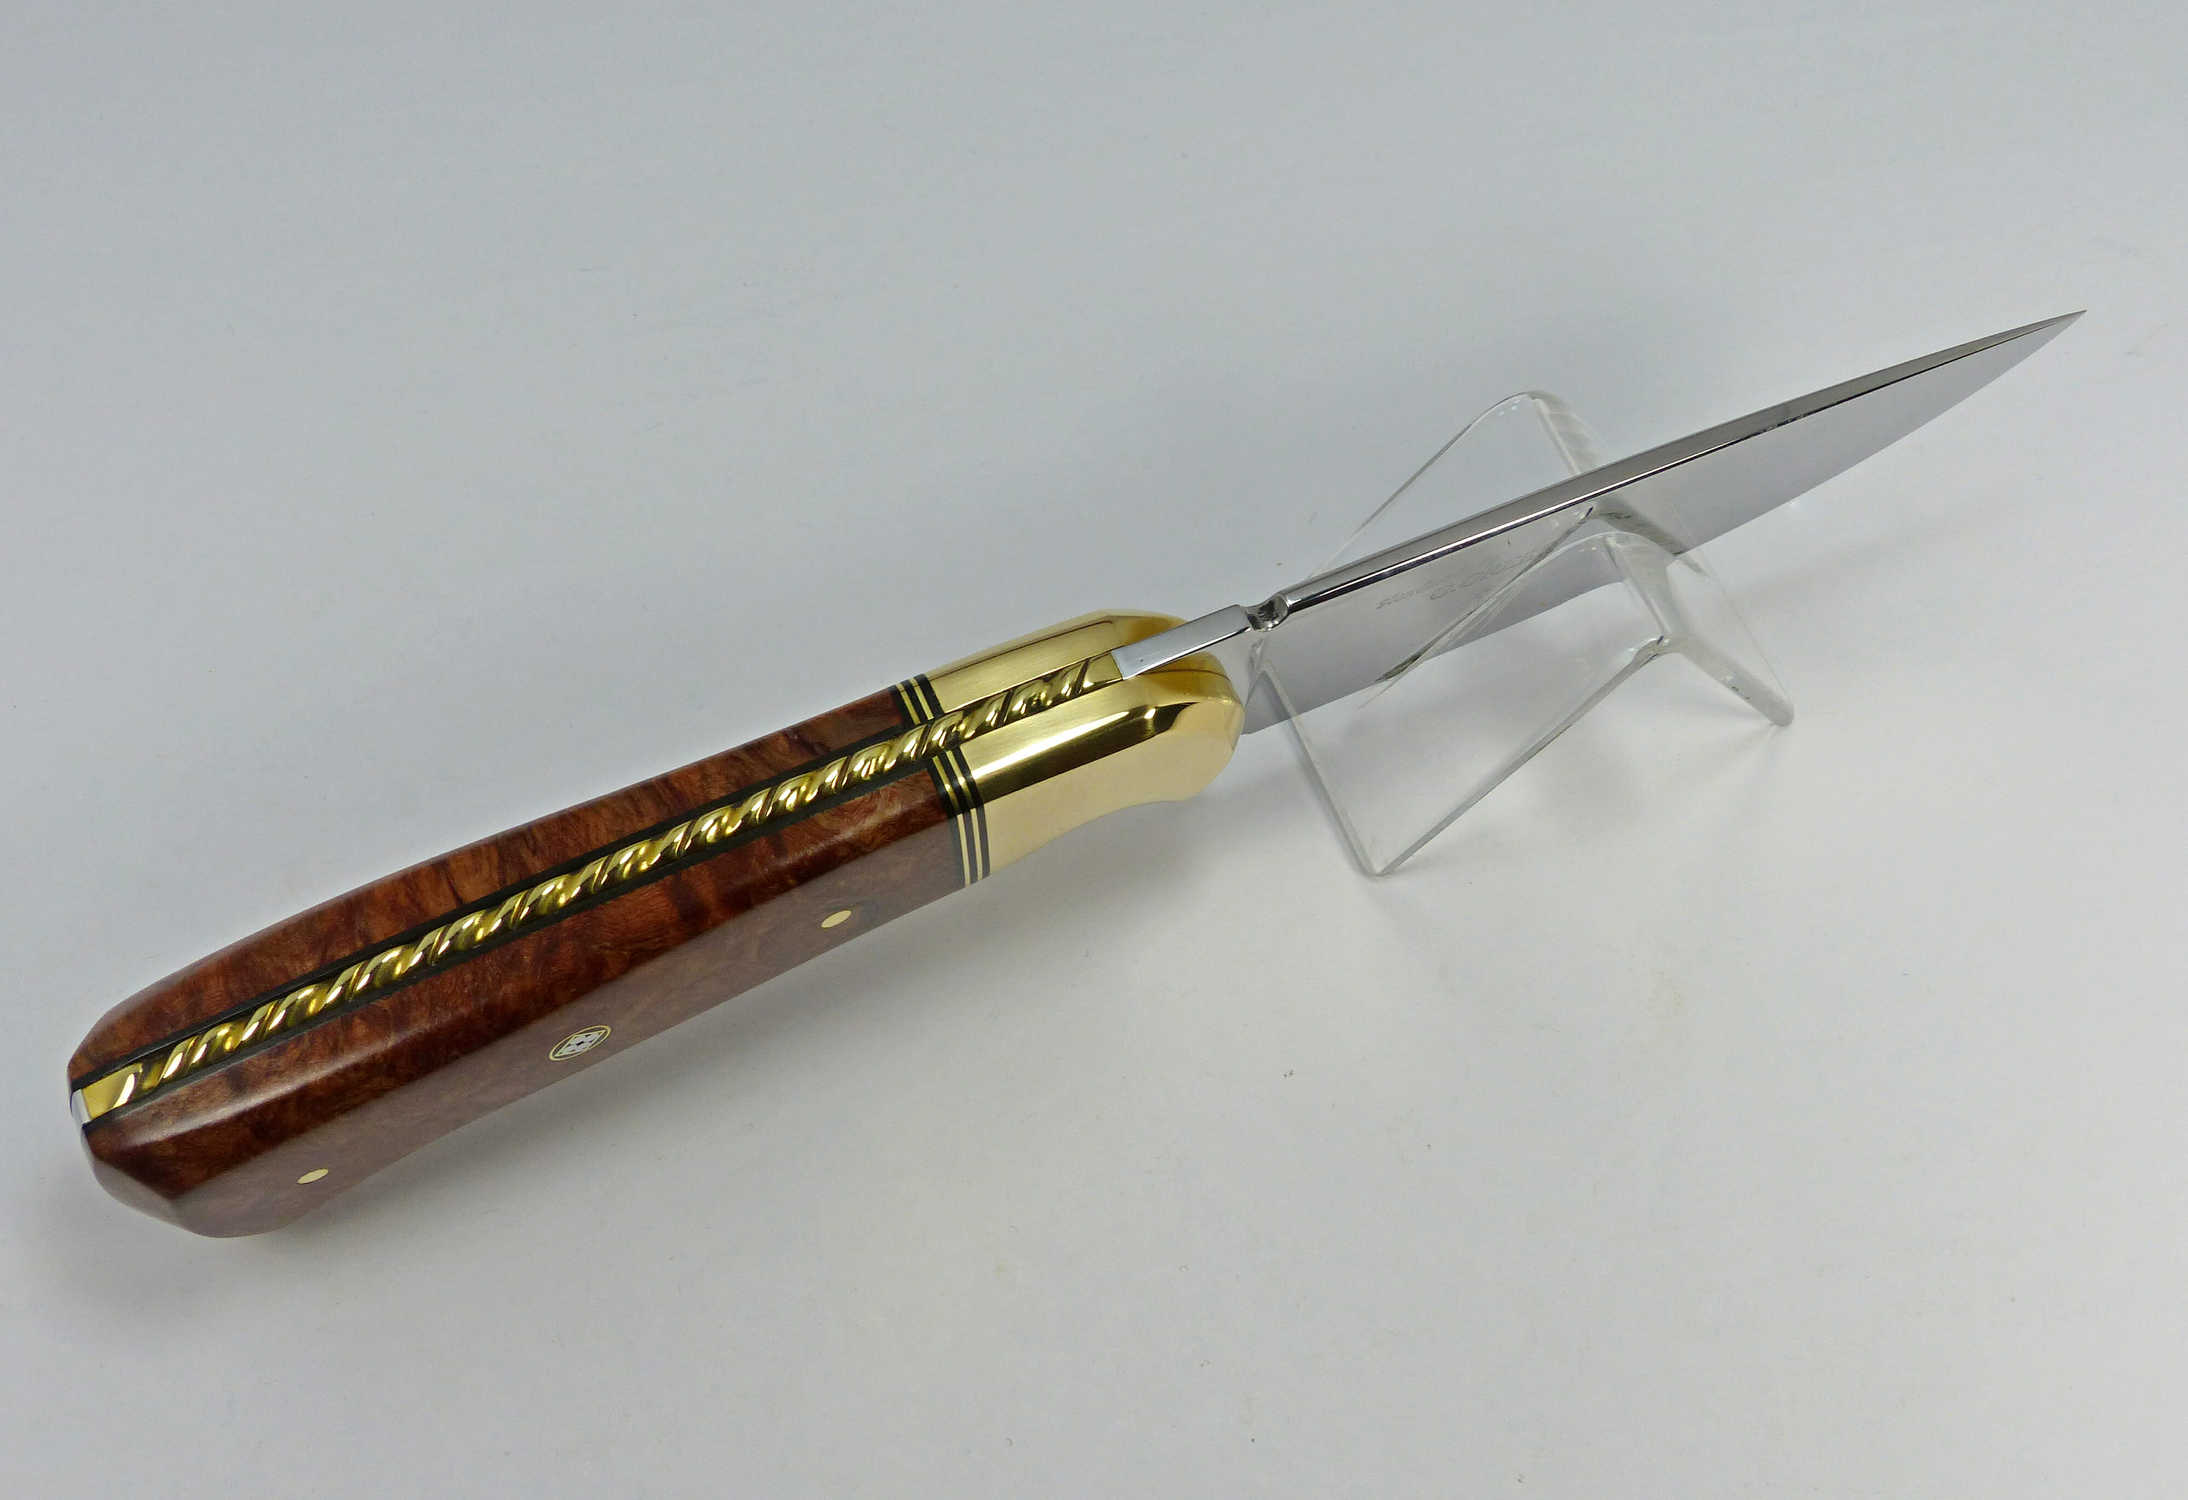 Top of brown knife showing inlaid brass rope filework and brass bolsters